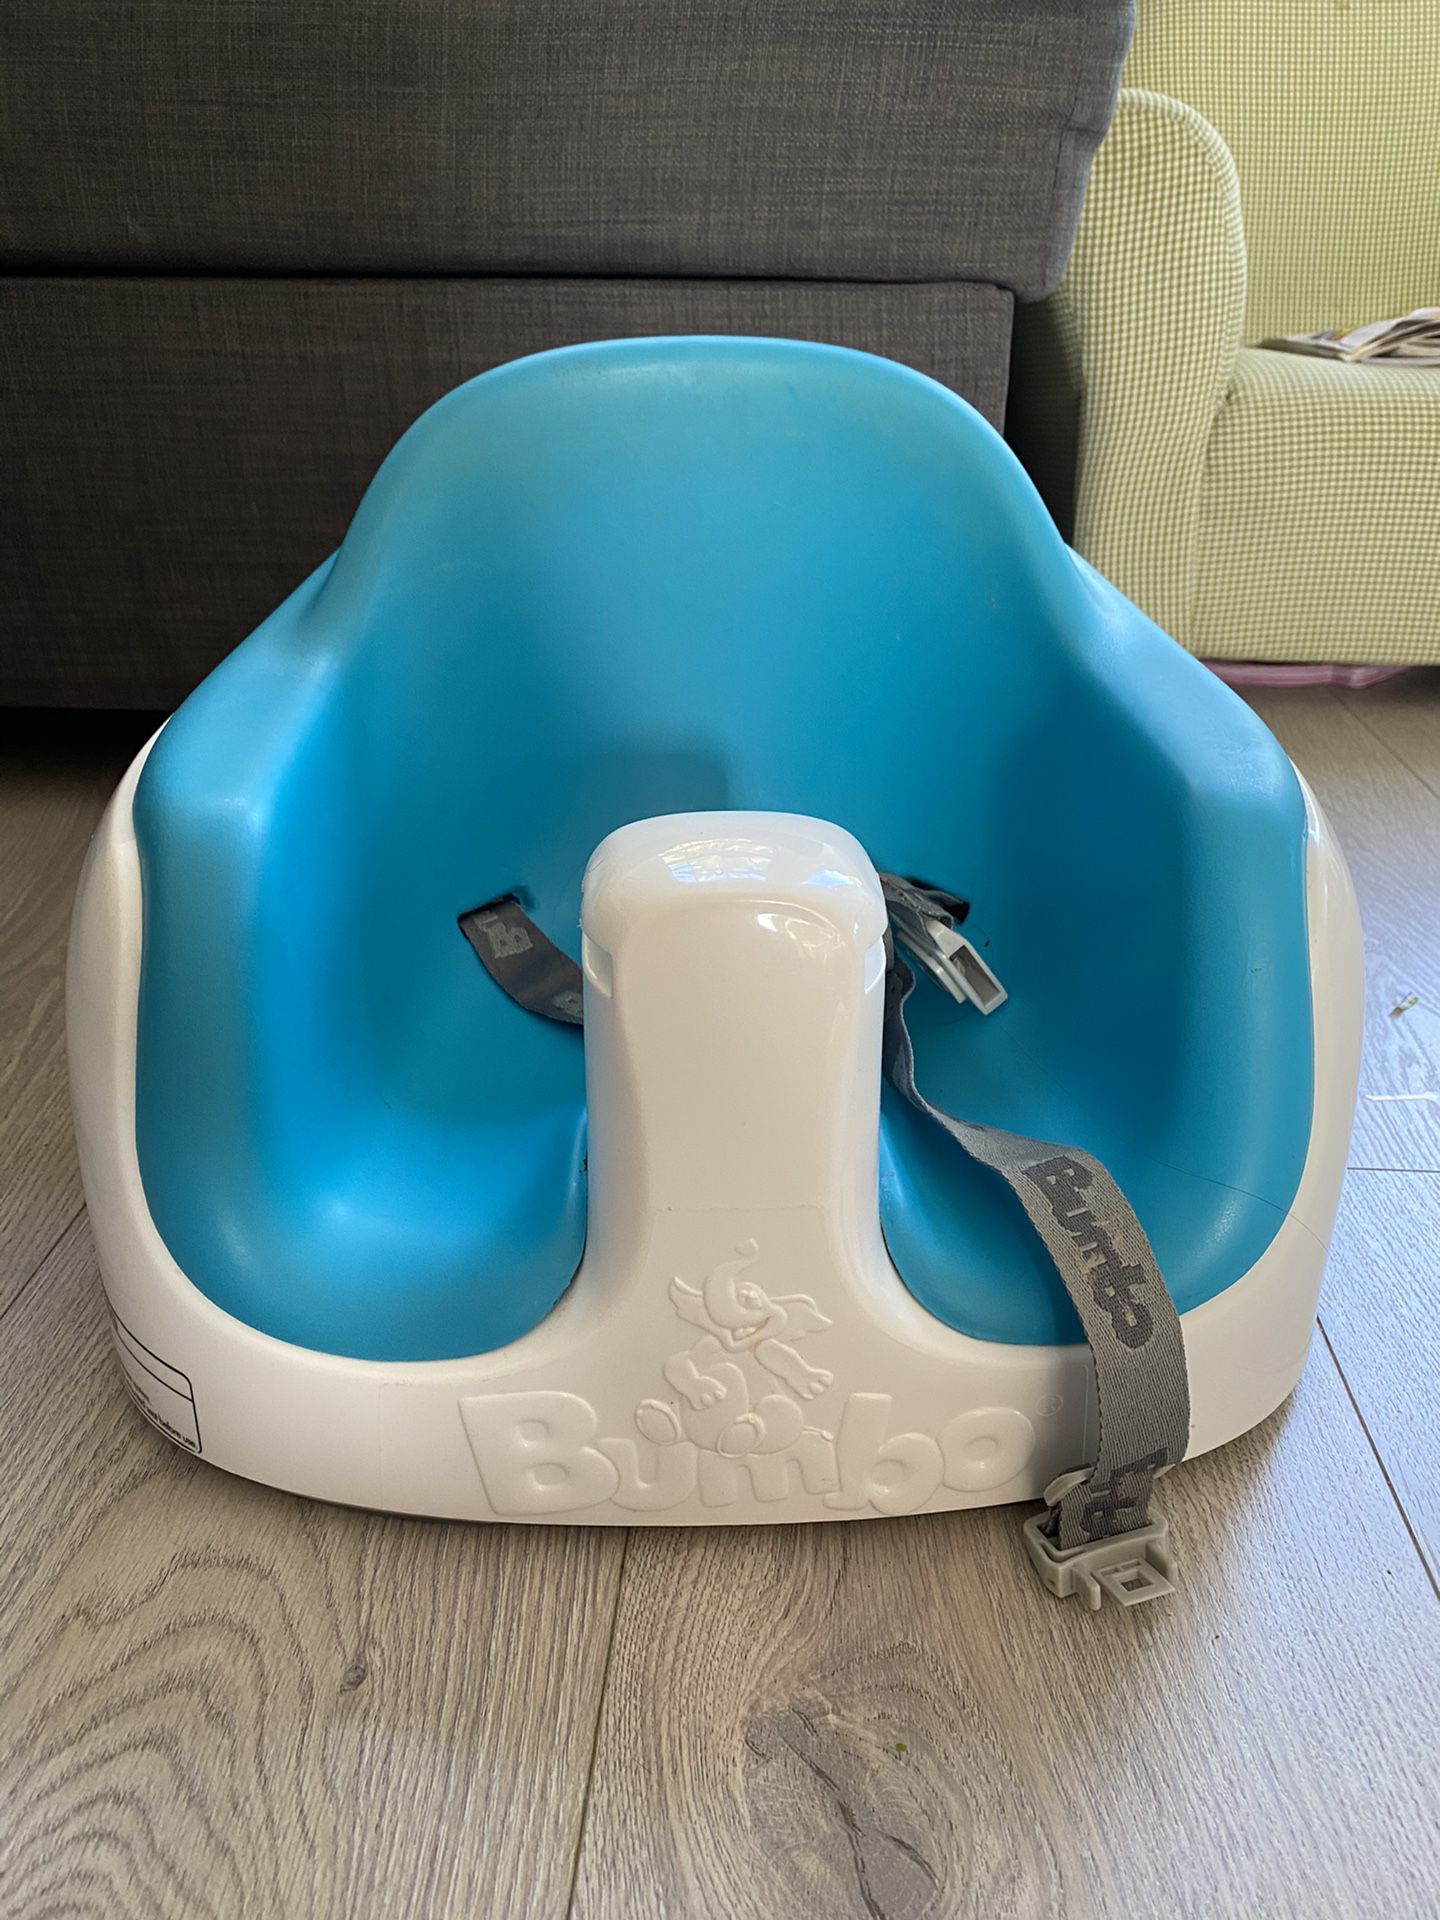 Bumbo Multi seat with toy accessory